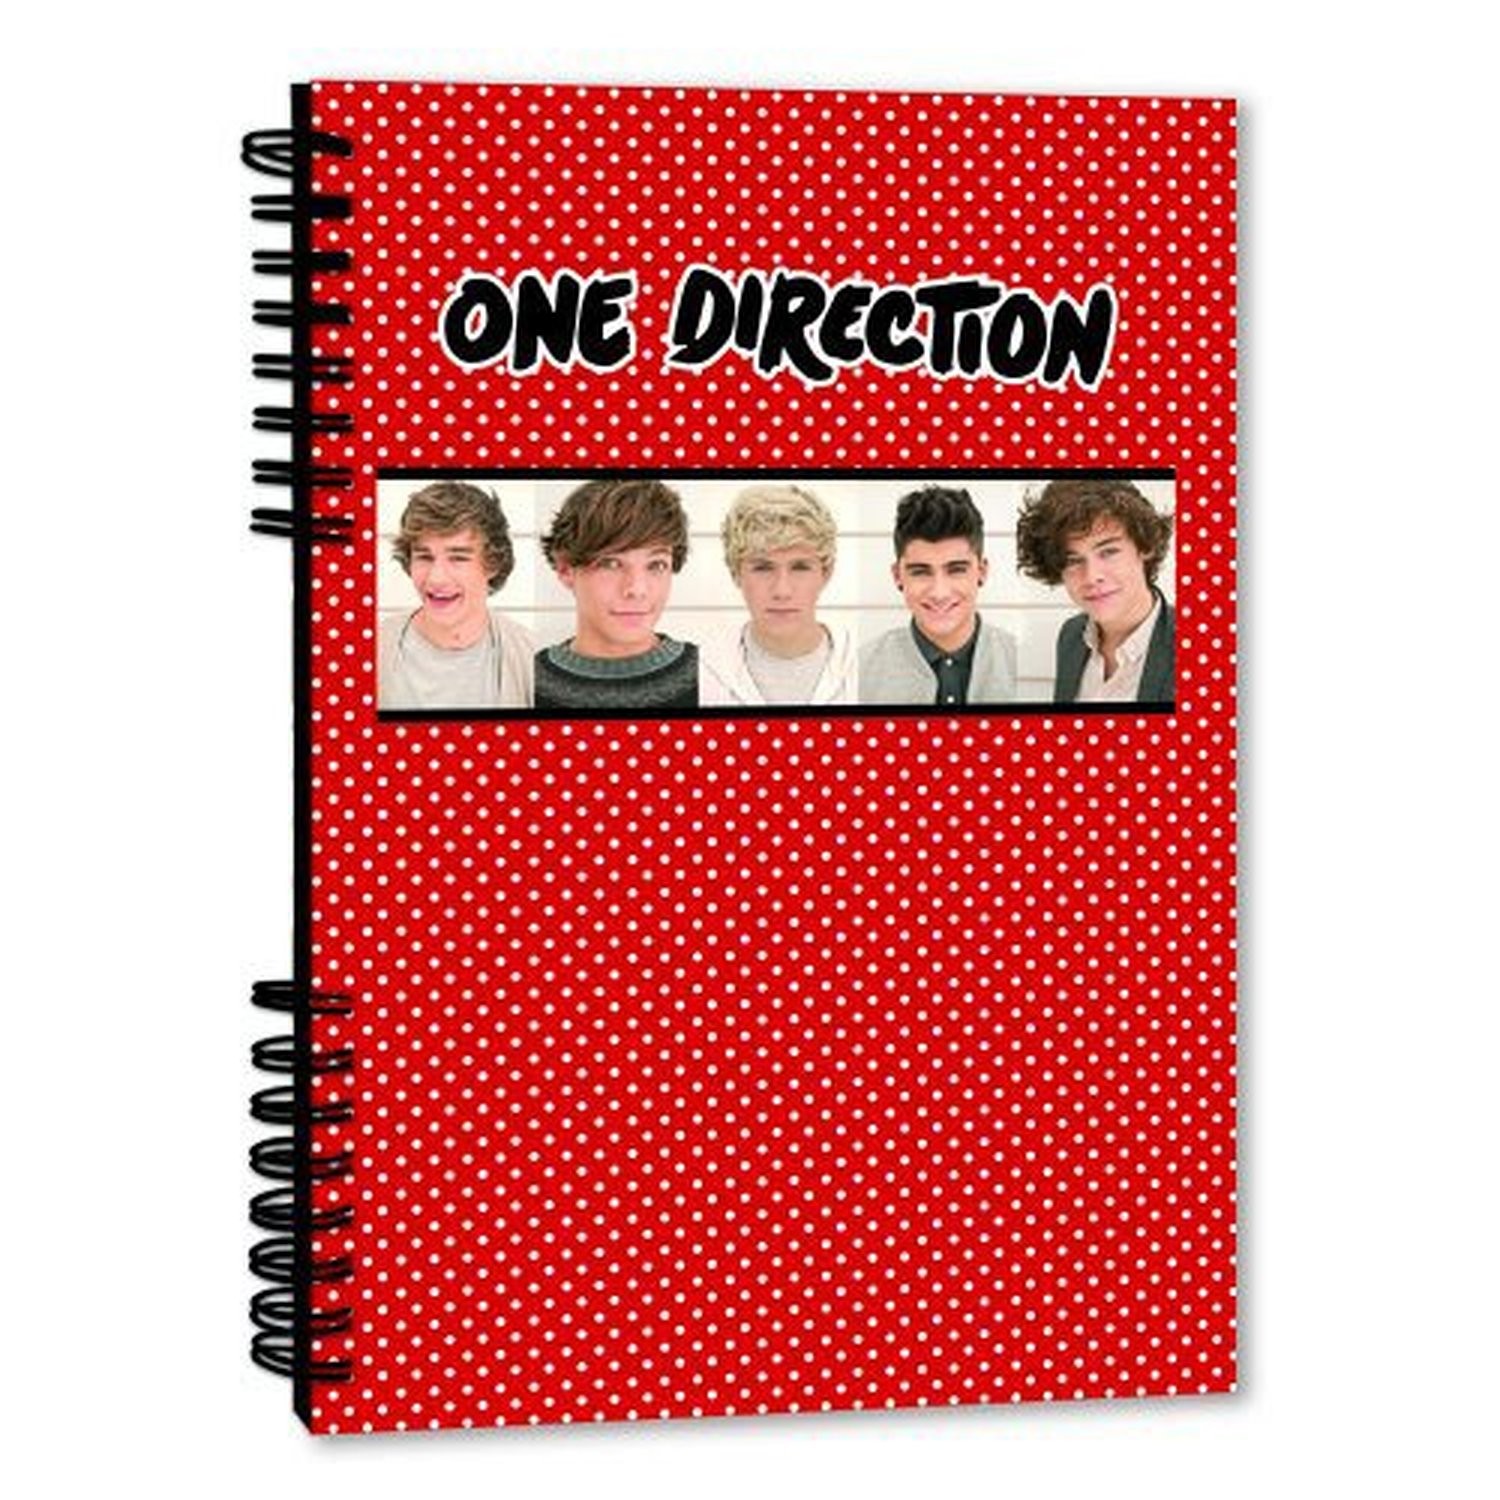 1D One Direction Spotty Notepad Journal Jotter Band Photo Red White Fan Official